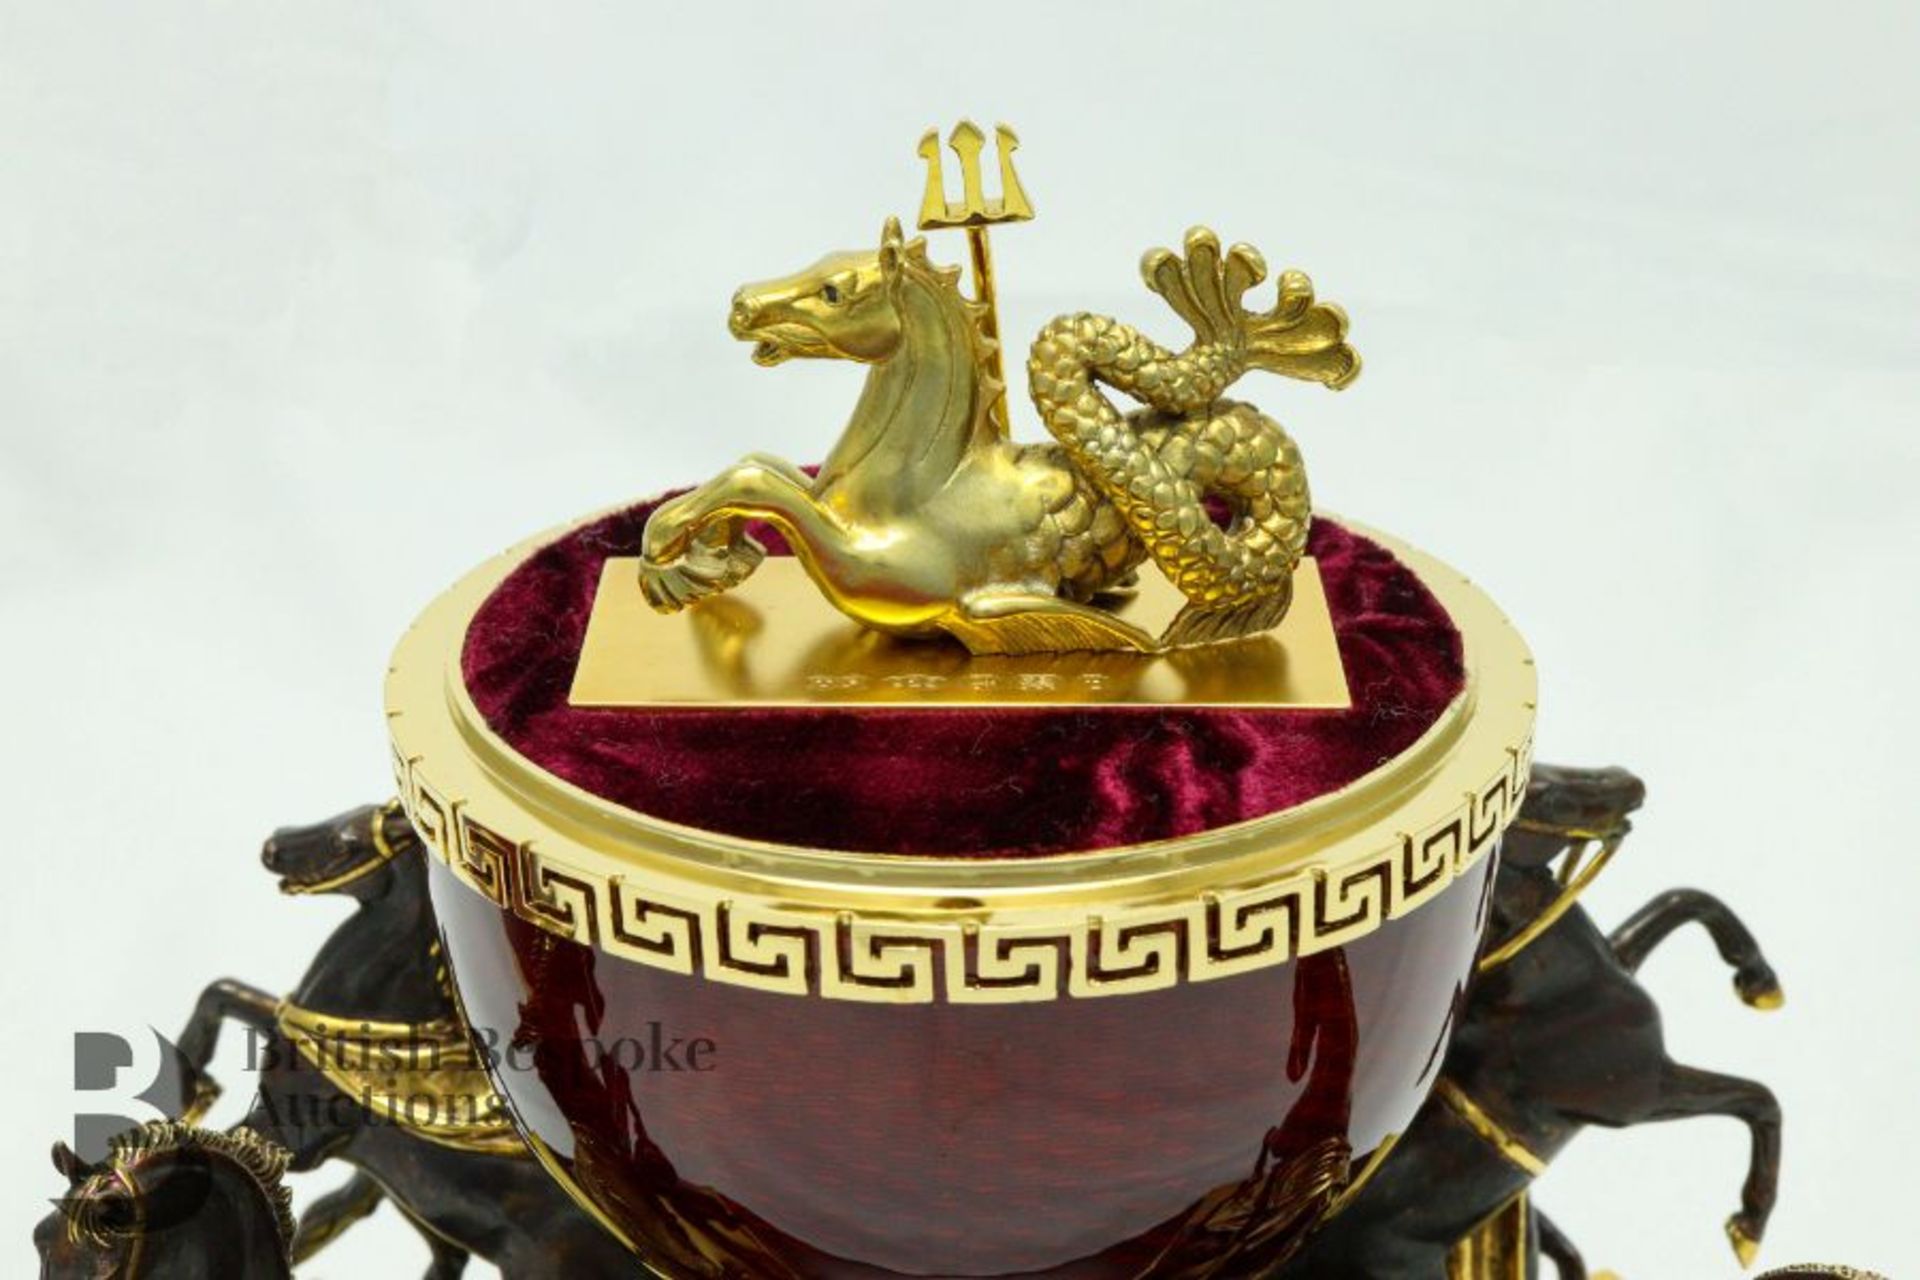 Theo Faberge Anichkov Egg - St Petersburg Collection - Image 11 of 37